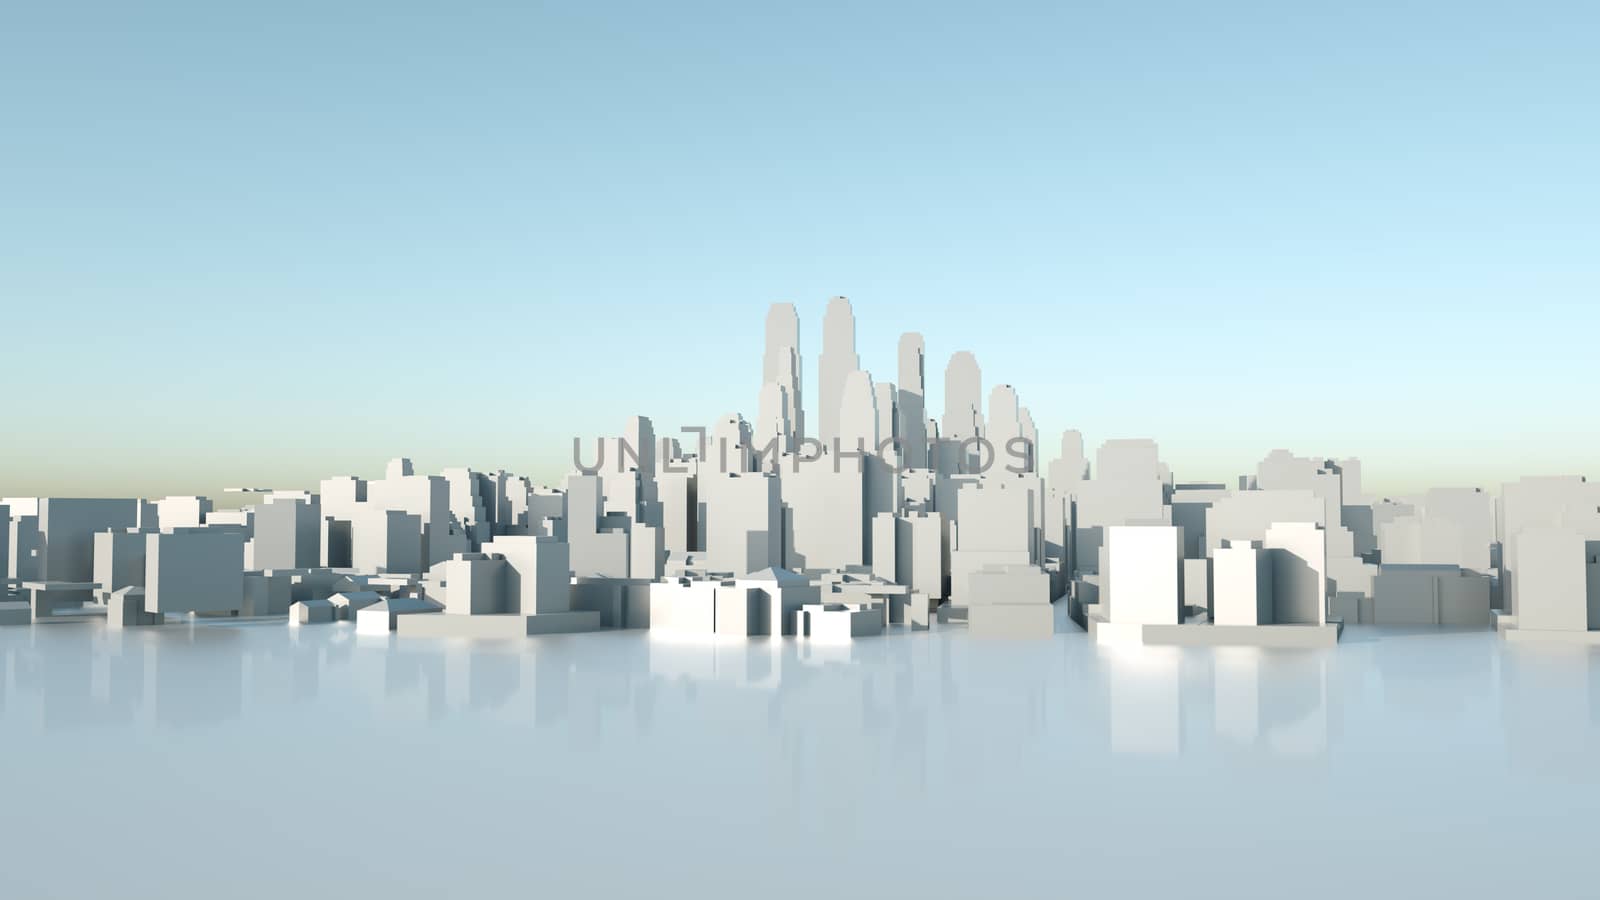 Abstract Modern White City on White Surface, aerial view. 3D illustration